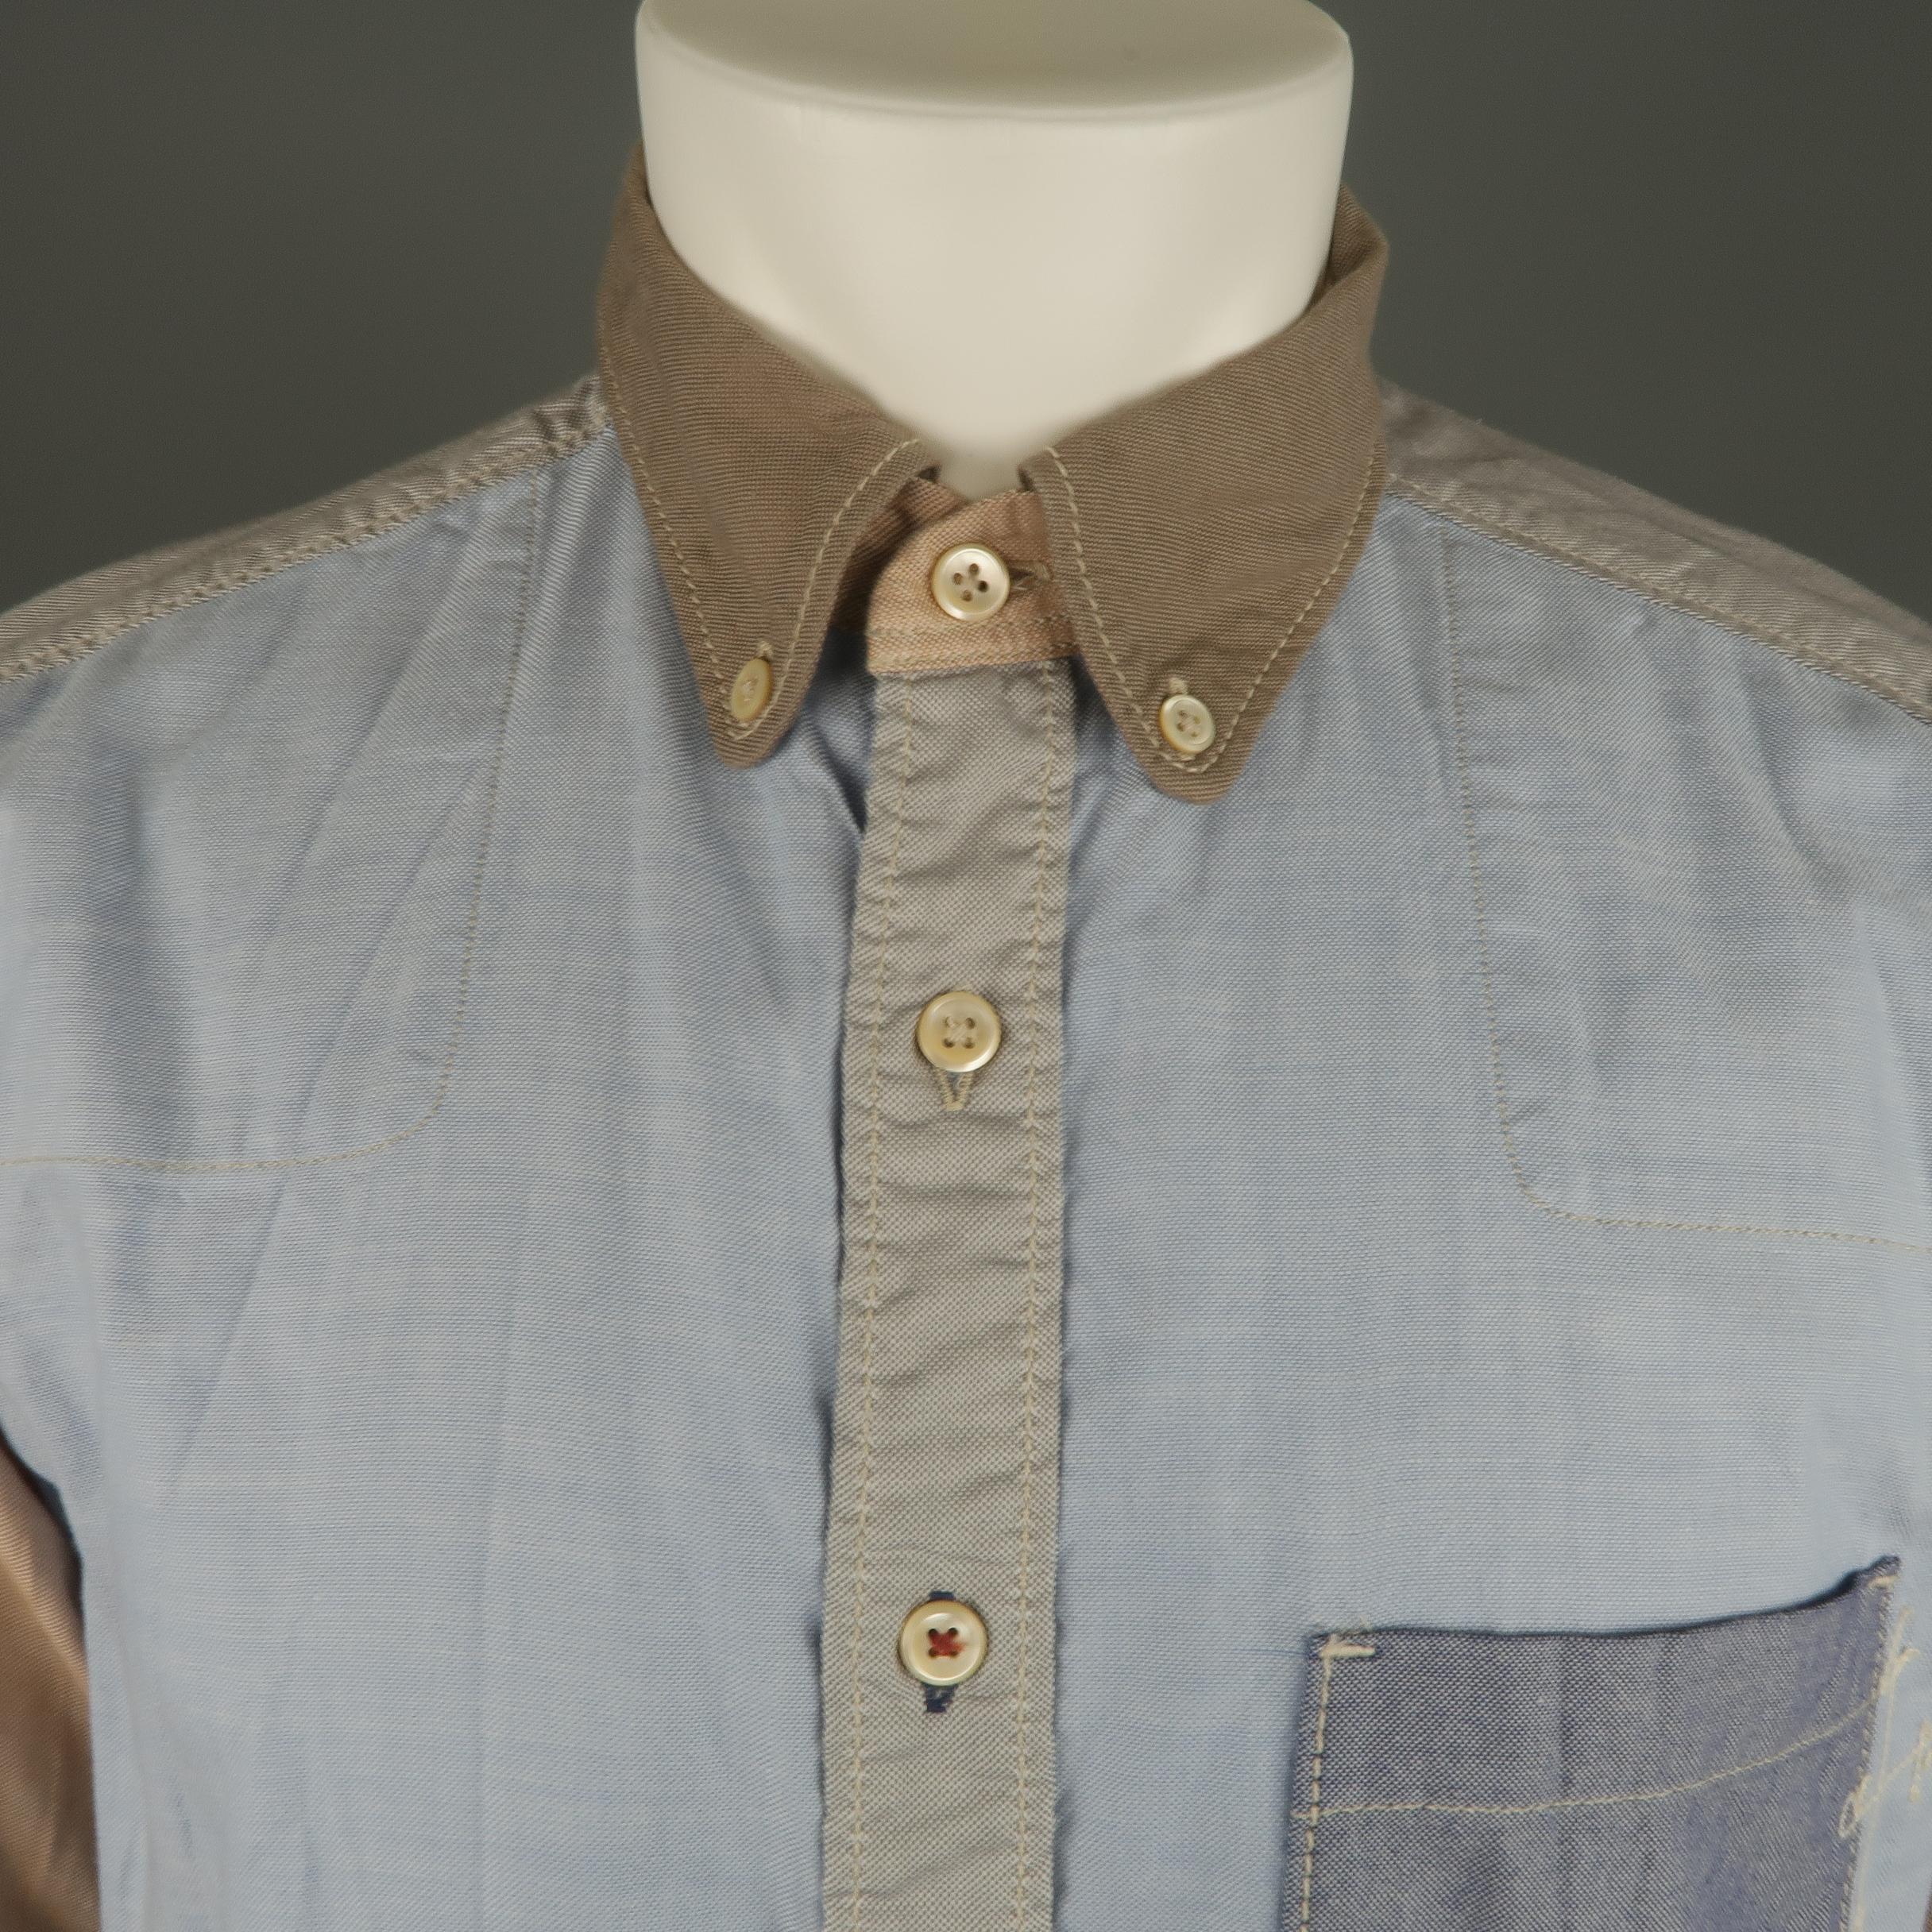 45RPM shirt comes in various color block shades of cotton Oxford material with a taupe button down collar, gray shoulders, light blue front, navy patch pocket with embroidery, and tan sleeves. Made in Japan.
 
Excellent Pre-Owned Condition.
Marked: